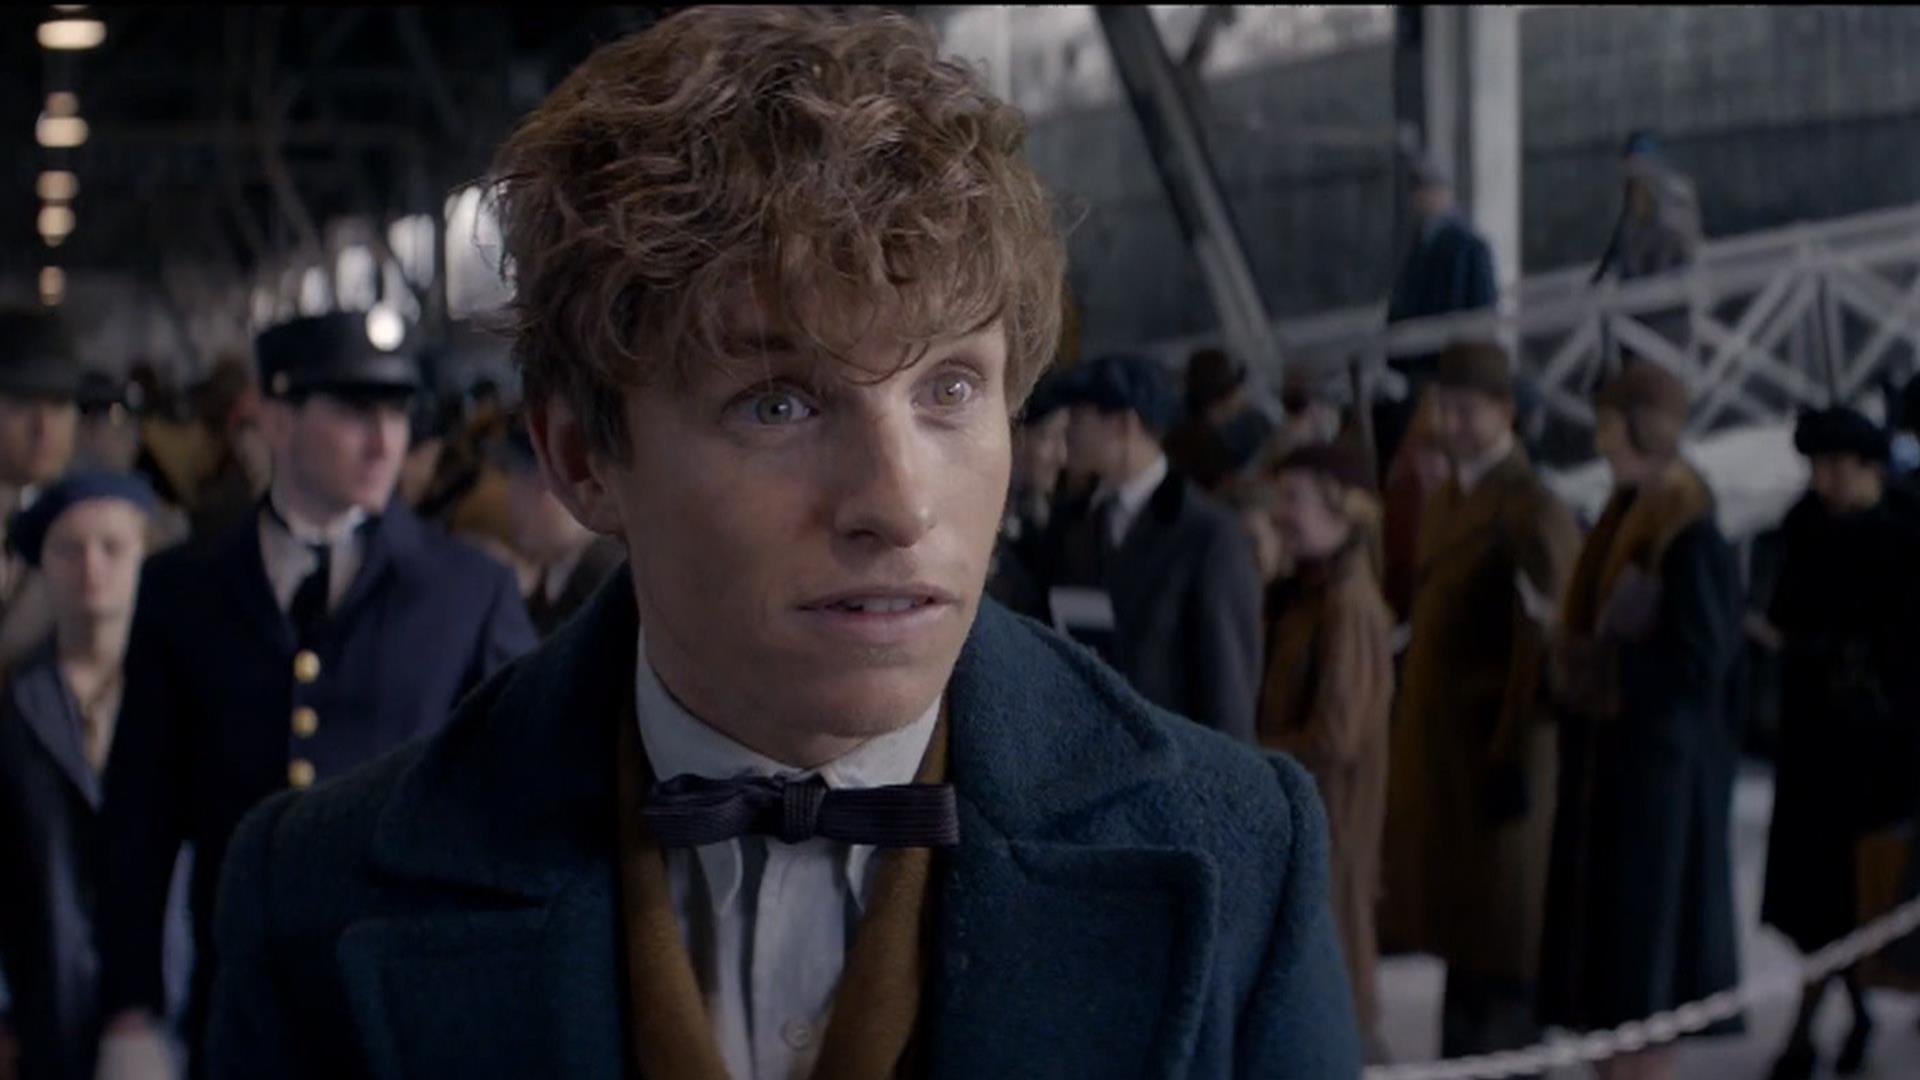 Watch Hd Film Fantastic Beasts And Where To Find Them Online 2016